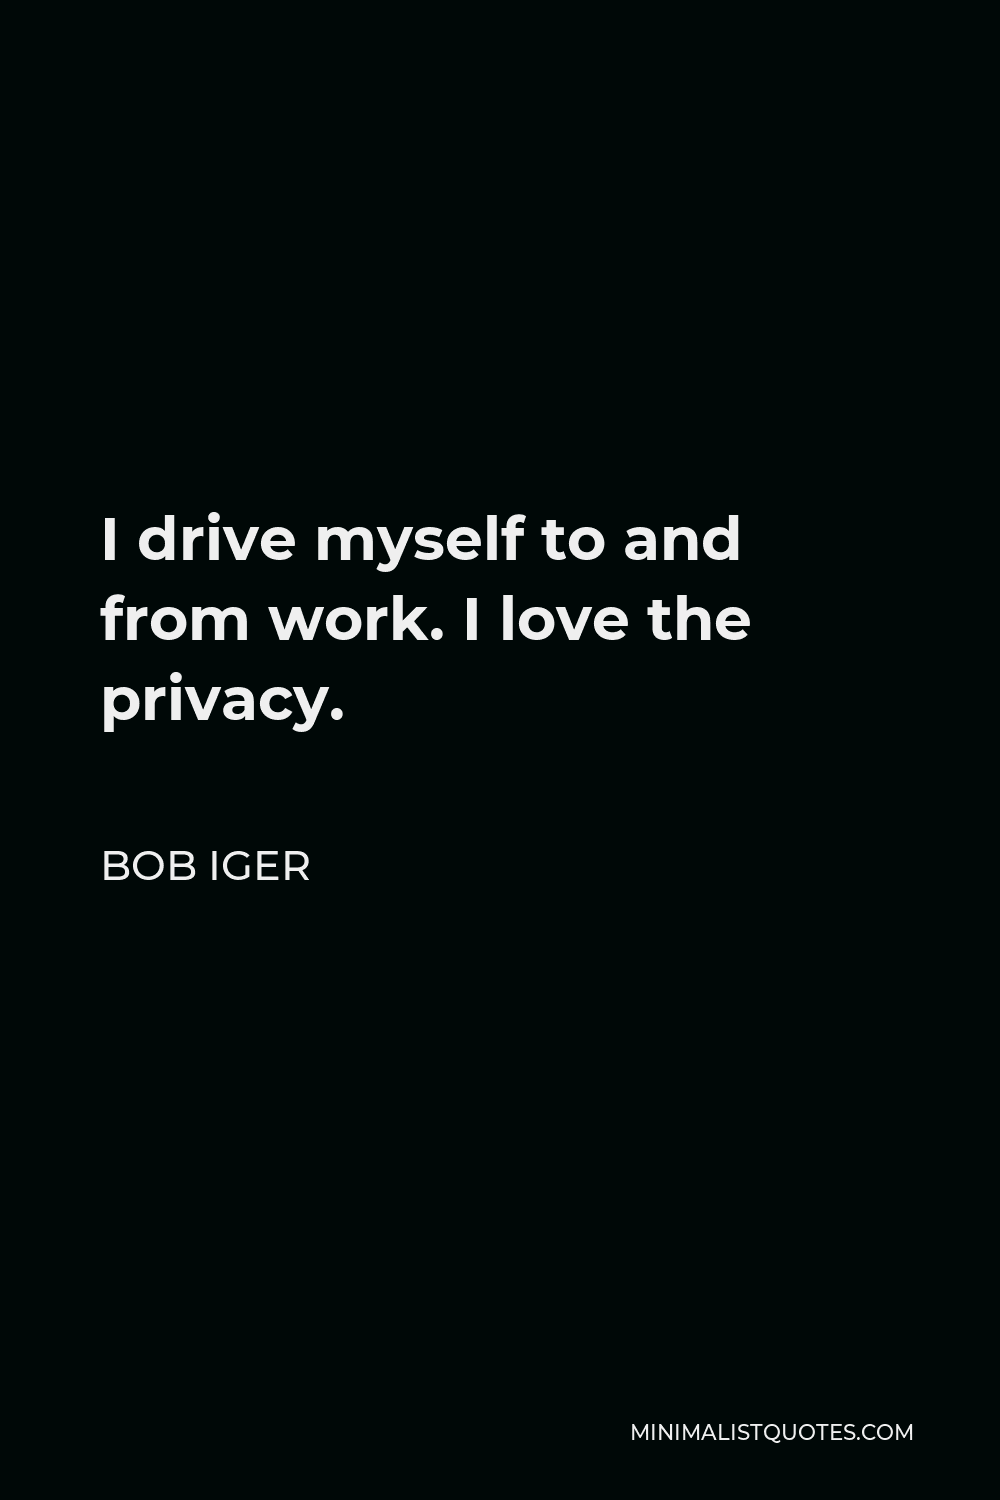 Bob Iger Quote - I drive myself to and from work. I love the privacy.